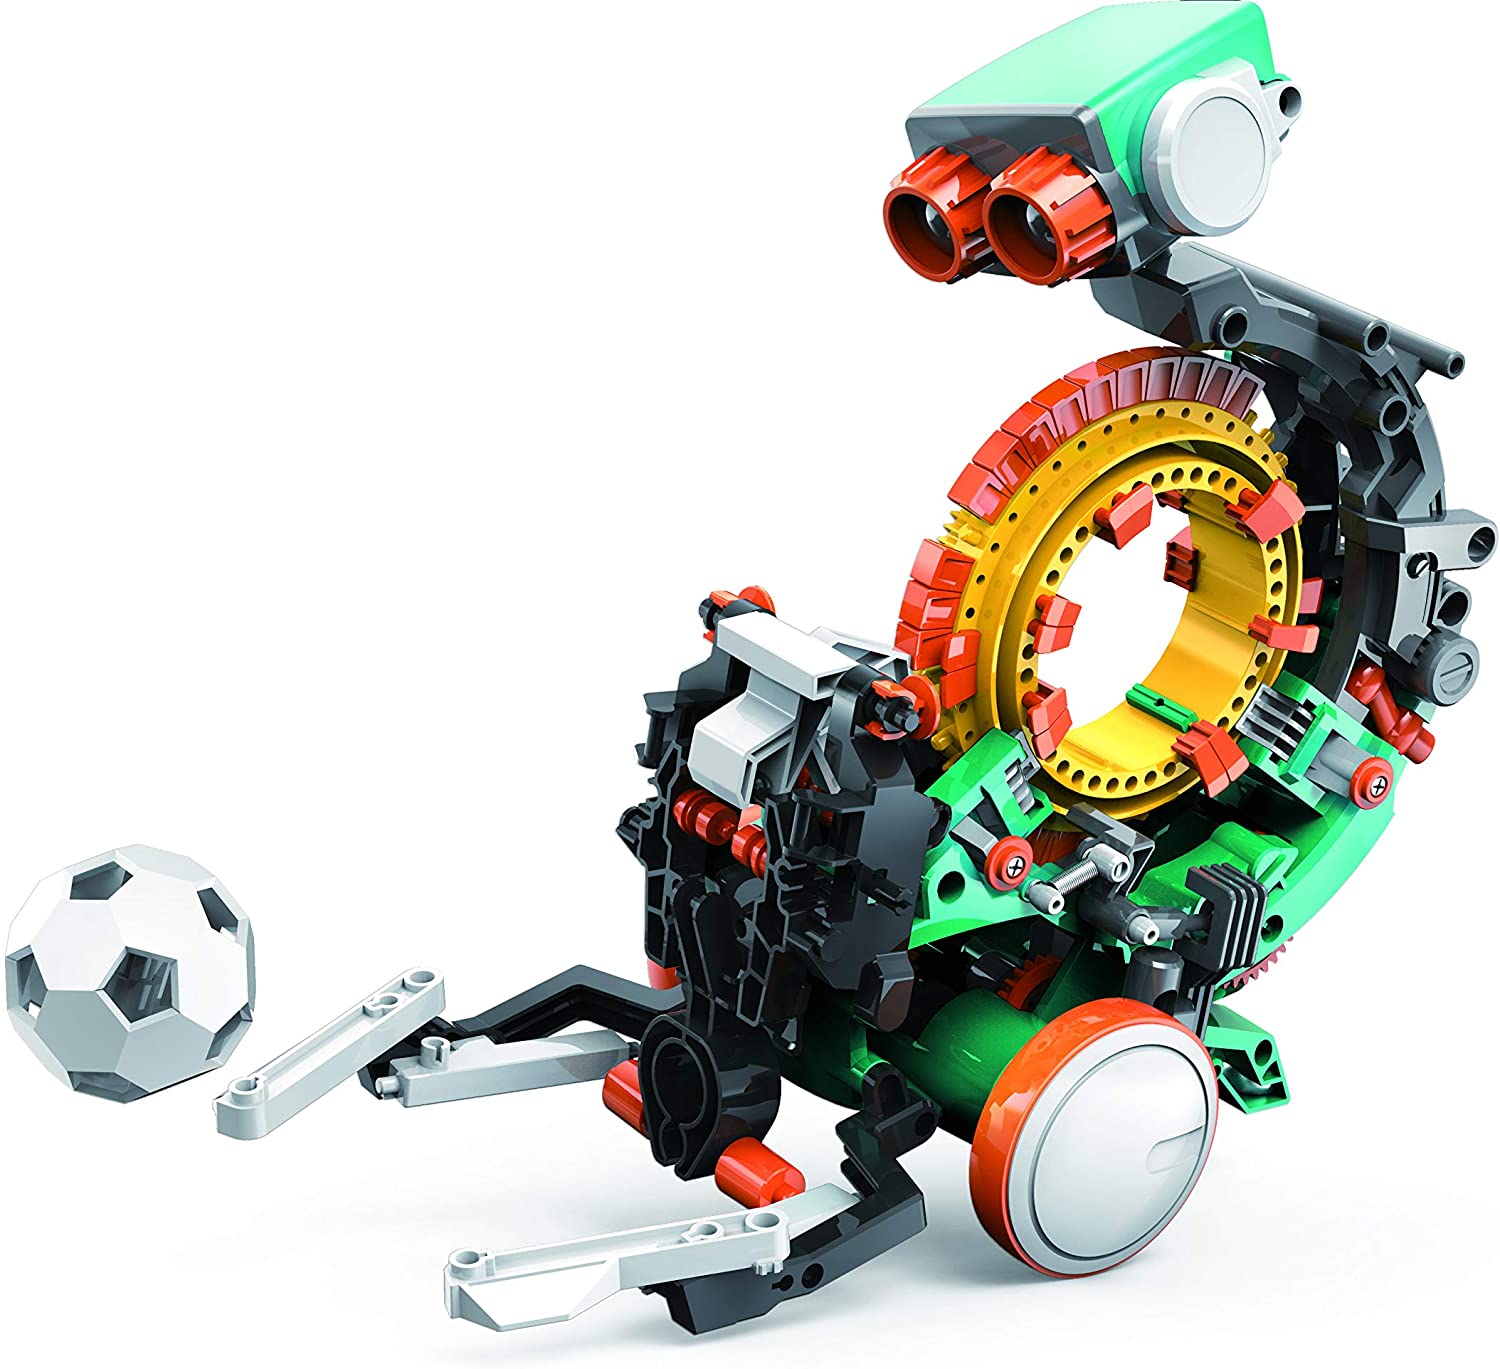 Top 5 Educational Coding Robots for Kids 